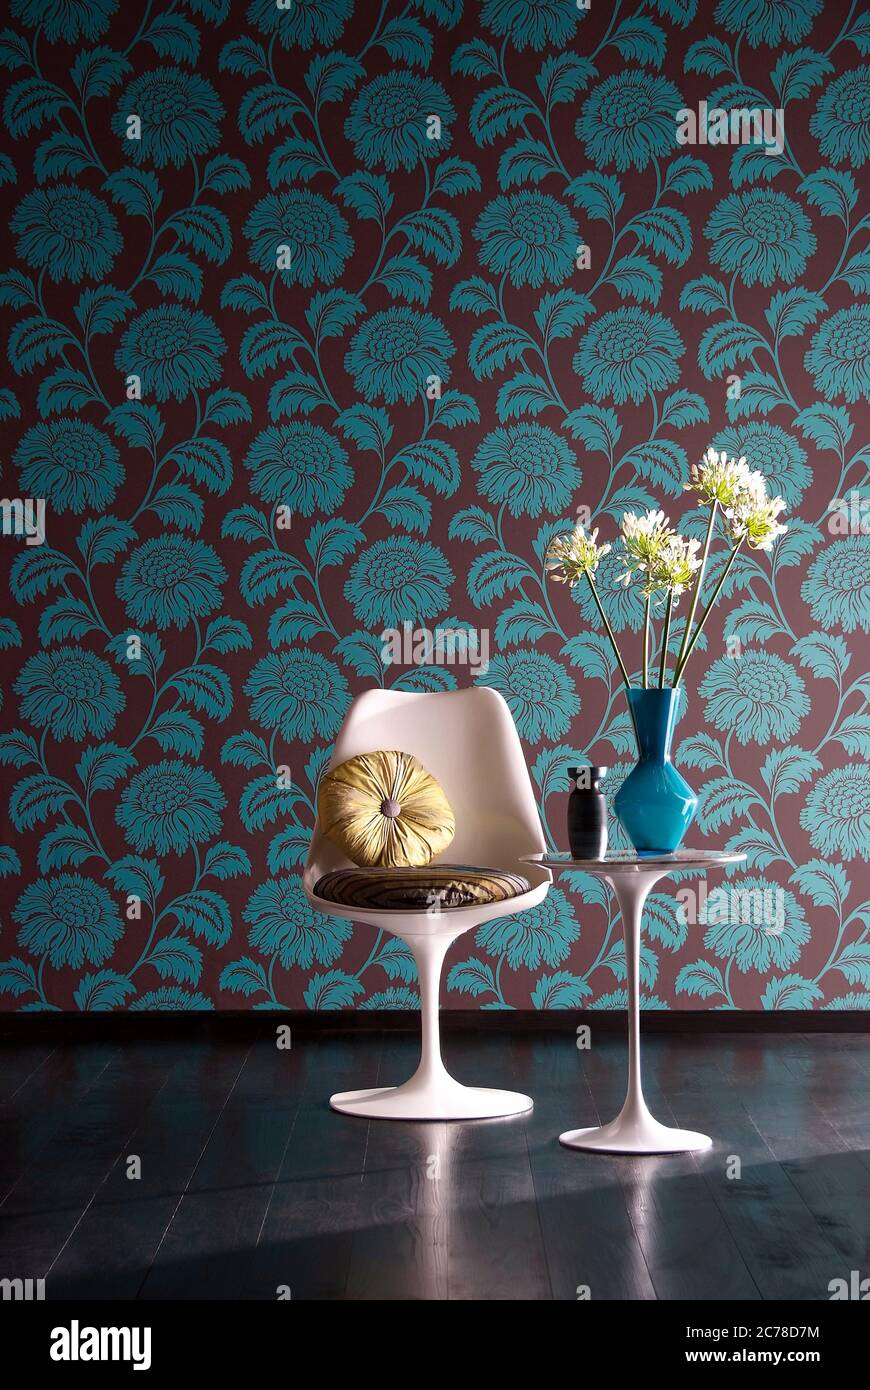 Shot of elegant chair with flower vase on side table in front of floral wallpaper wall Stock Photo